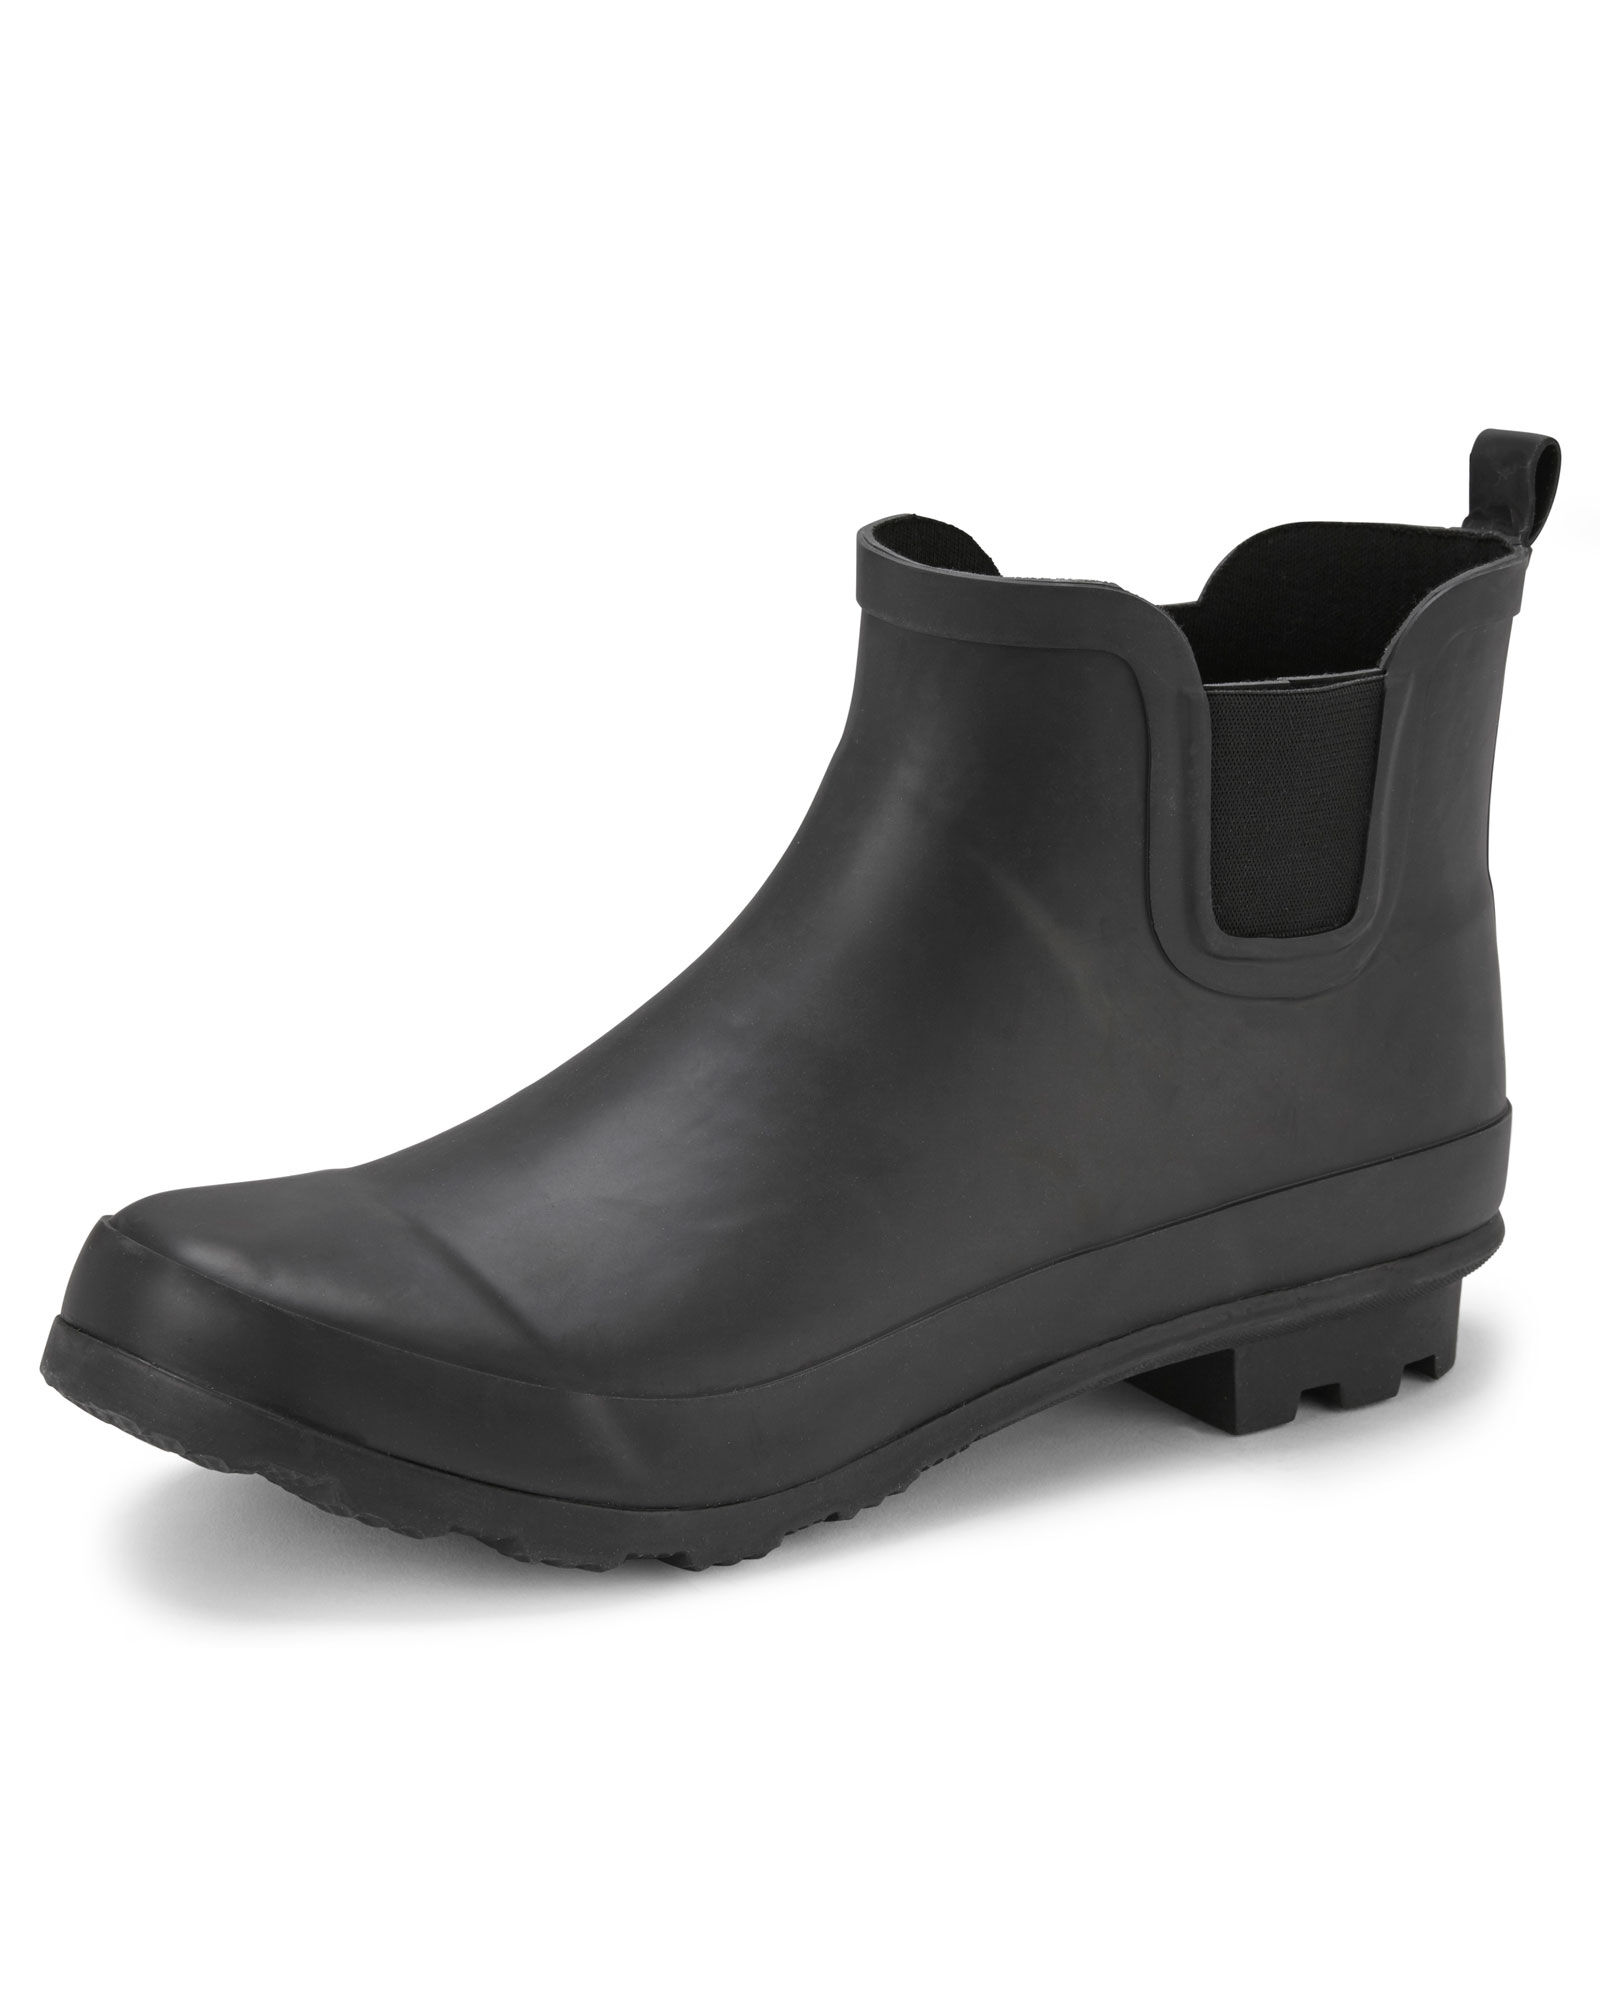 Ankle Wellington Boots at Cotton Traders